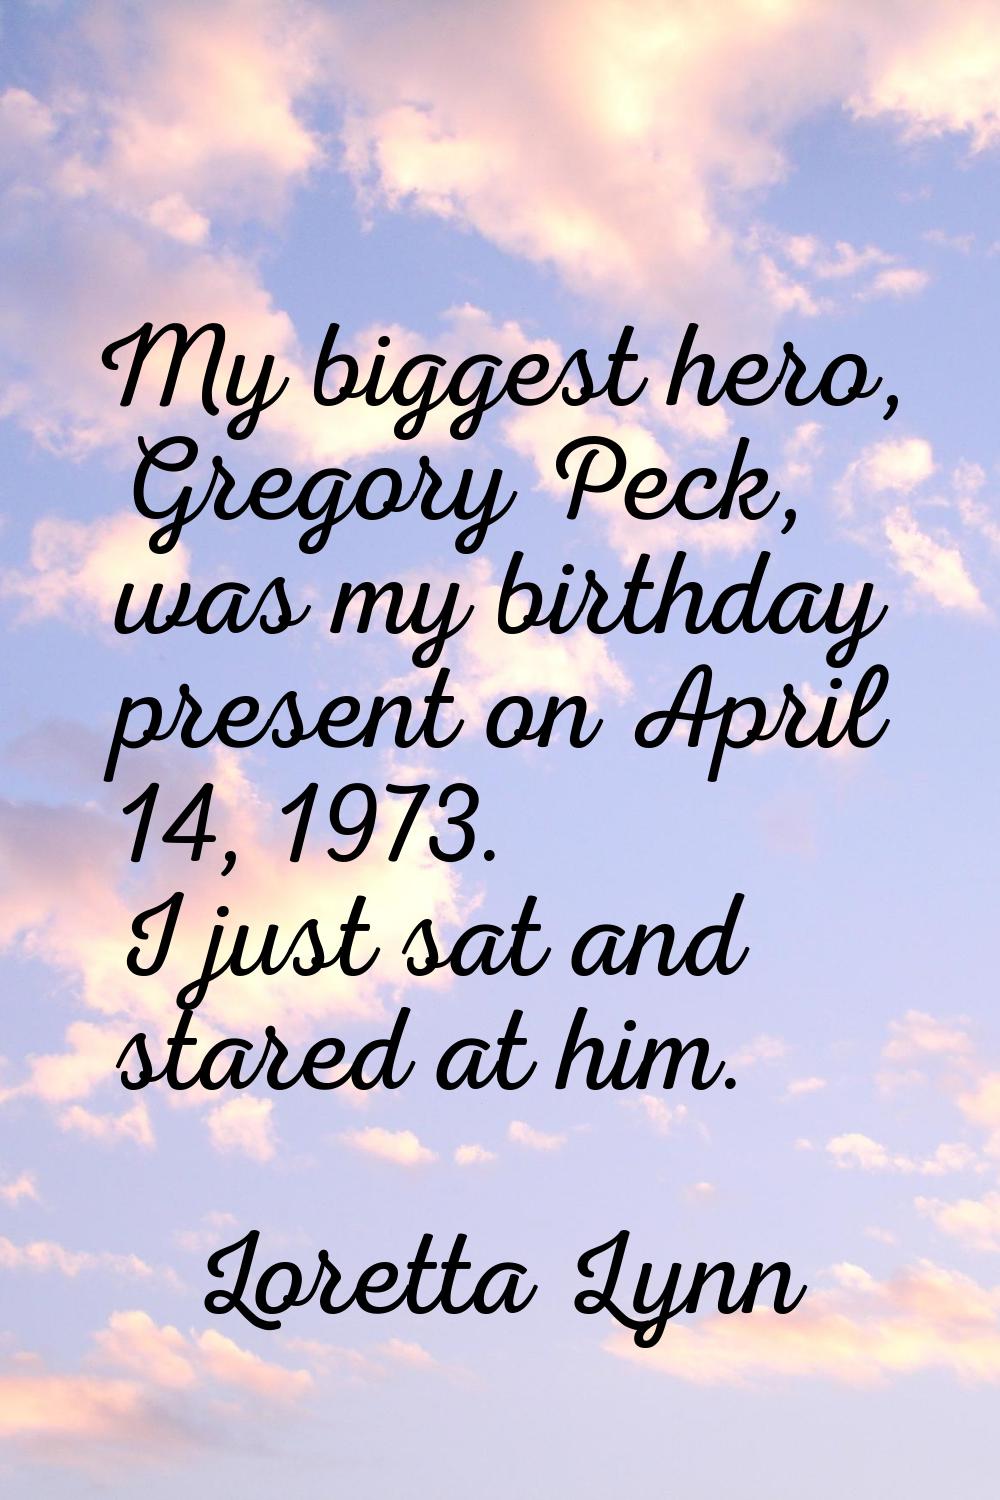 My biggest hero, Gregory Peck, was my birthday present on April 14, 1973. I just sat and stared at 